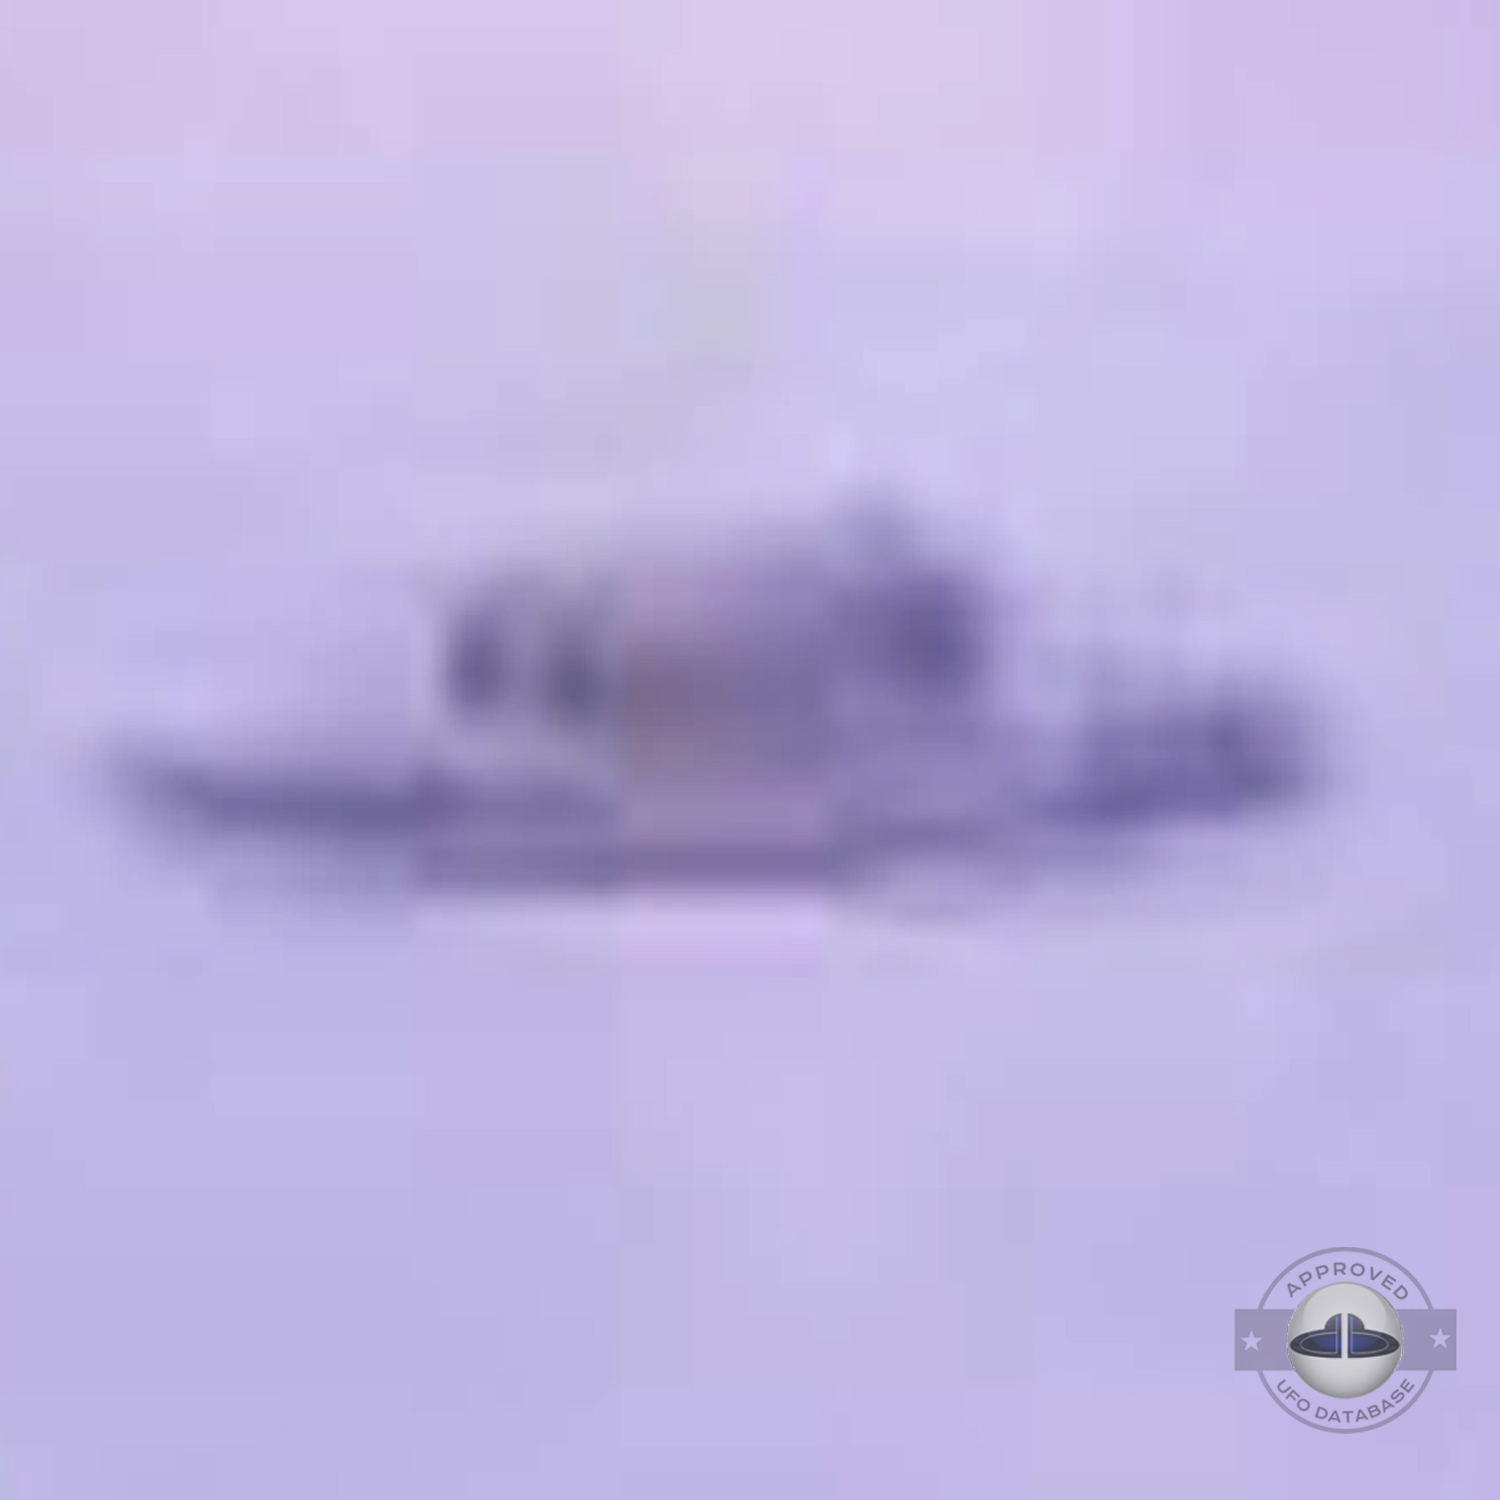 Hat Shaped UFO captured on picture in Shillong | India | August 2009 UFO Picture #224-5